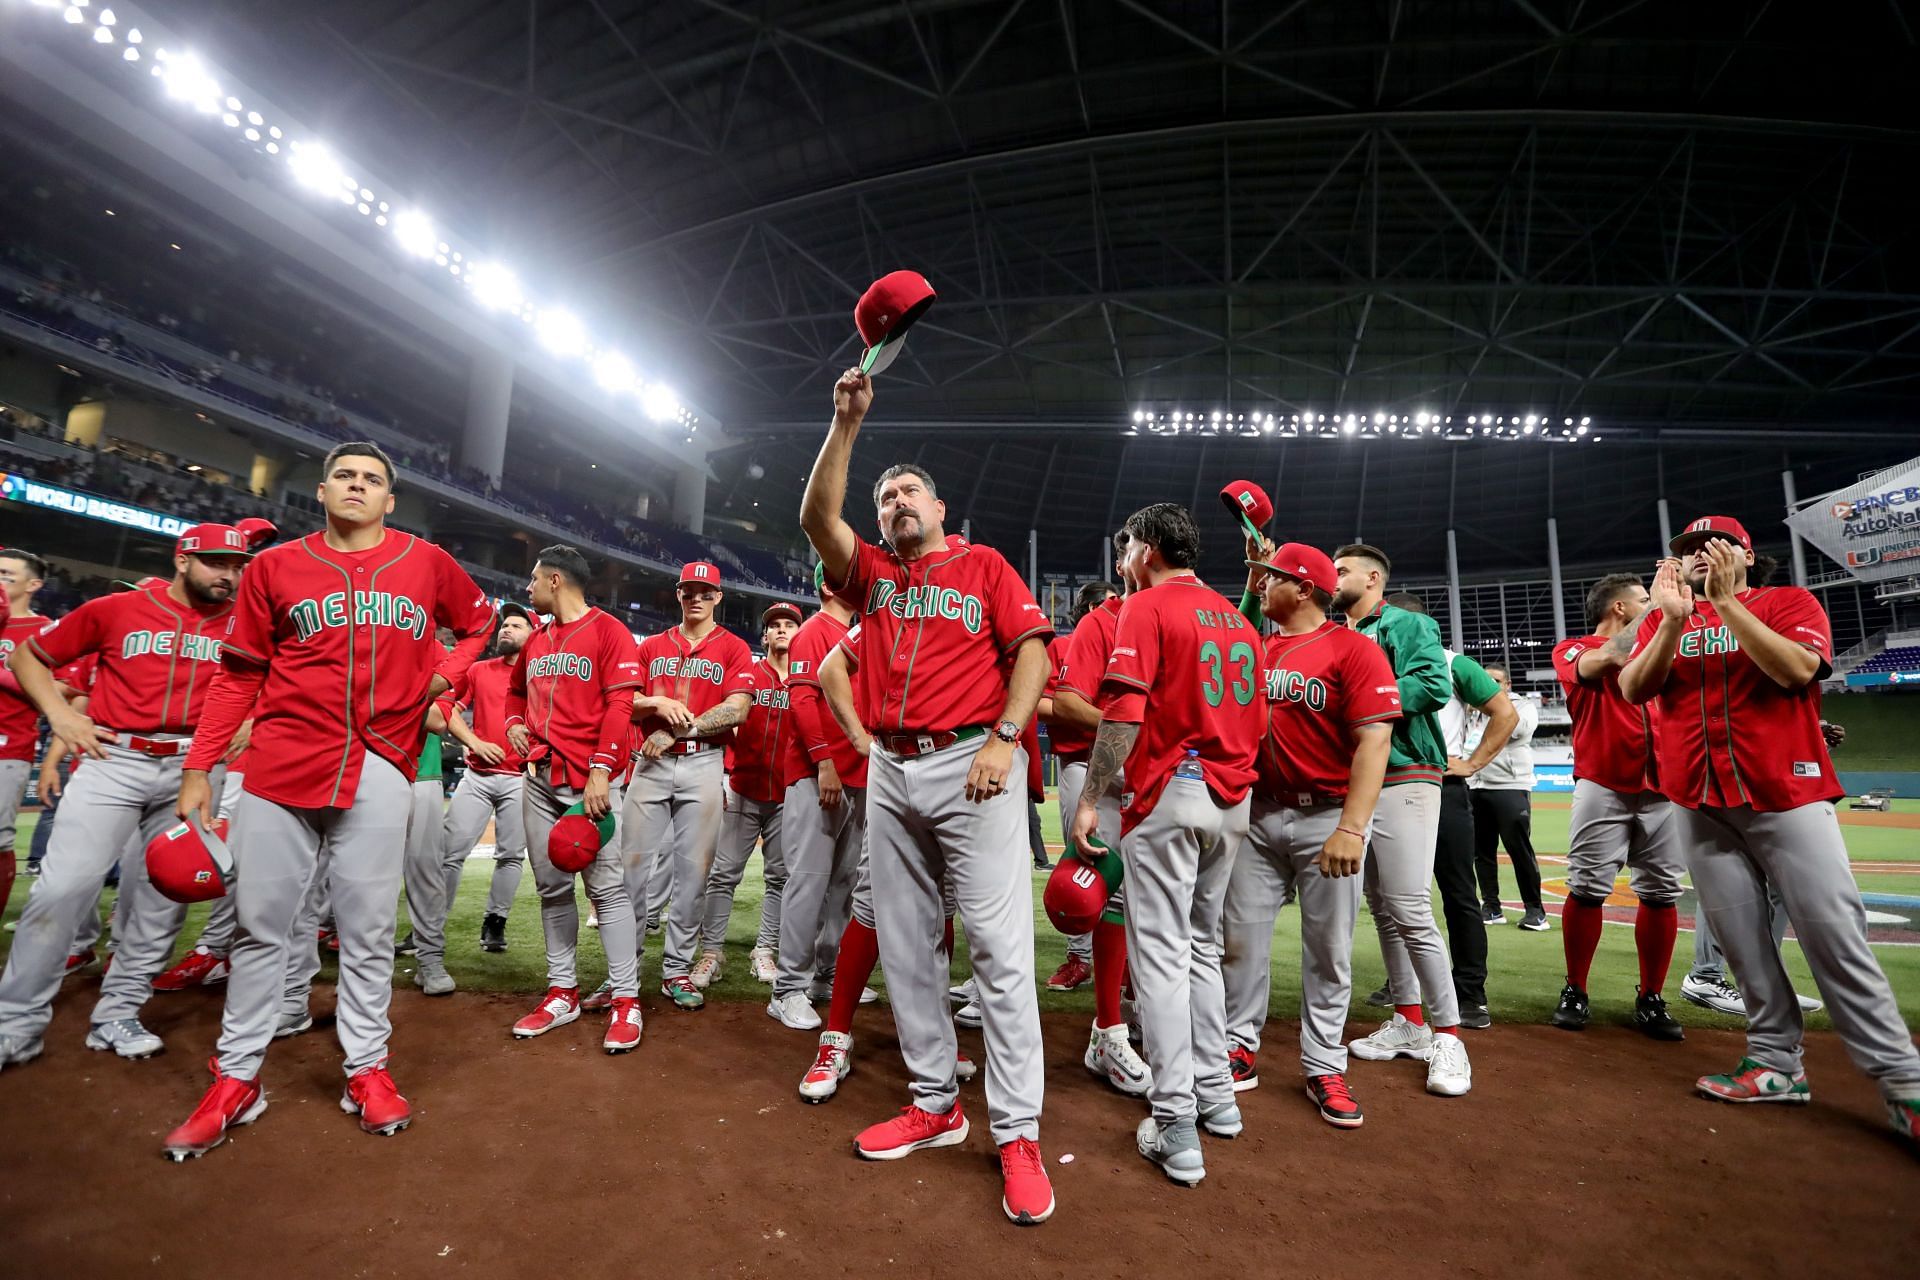 MLB News: The Japan players that Mexico must fear most ahead of semi-final